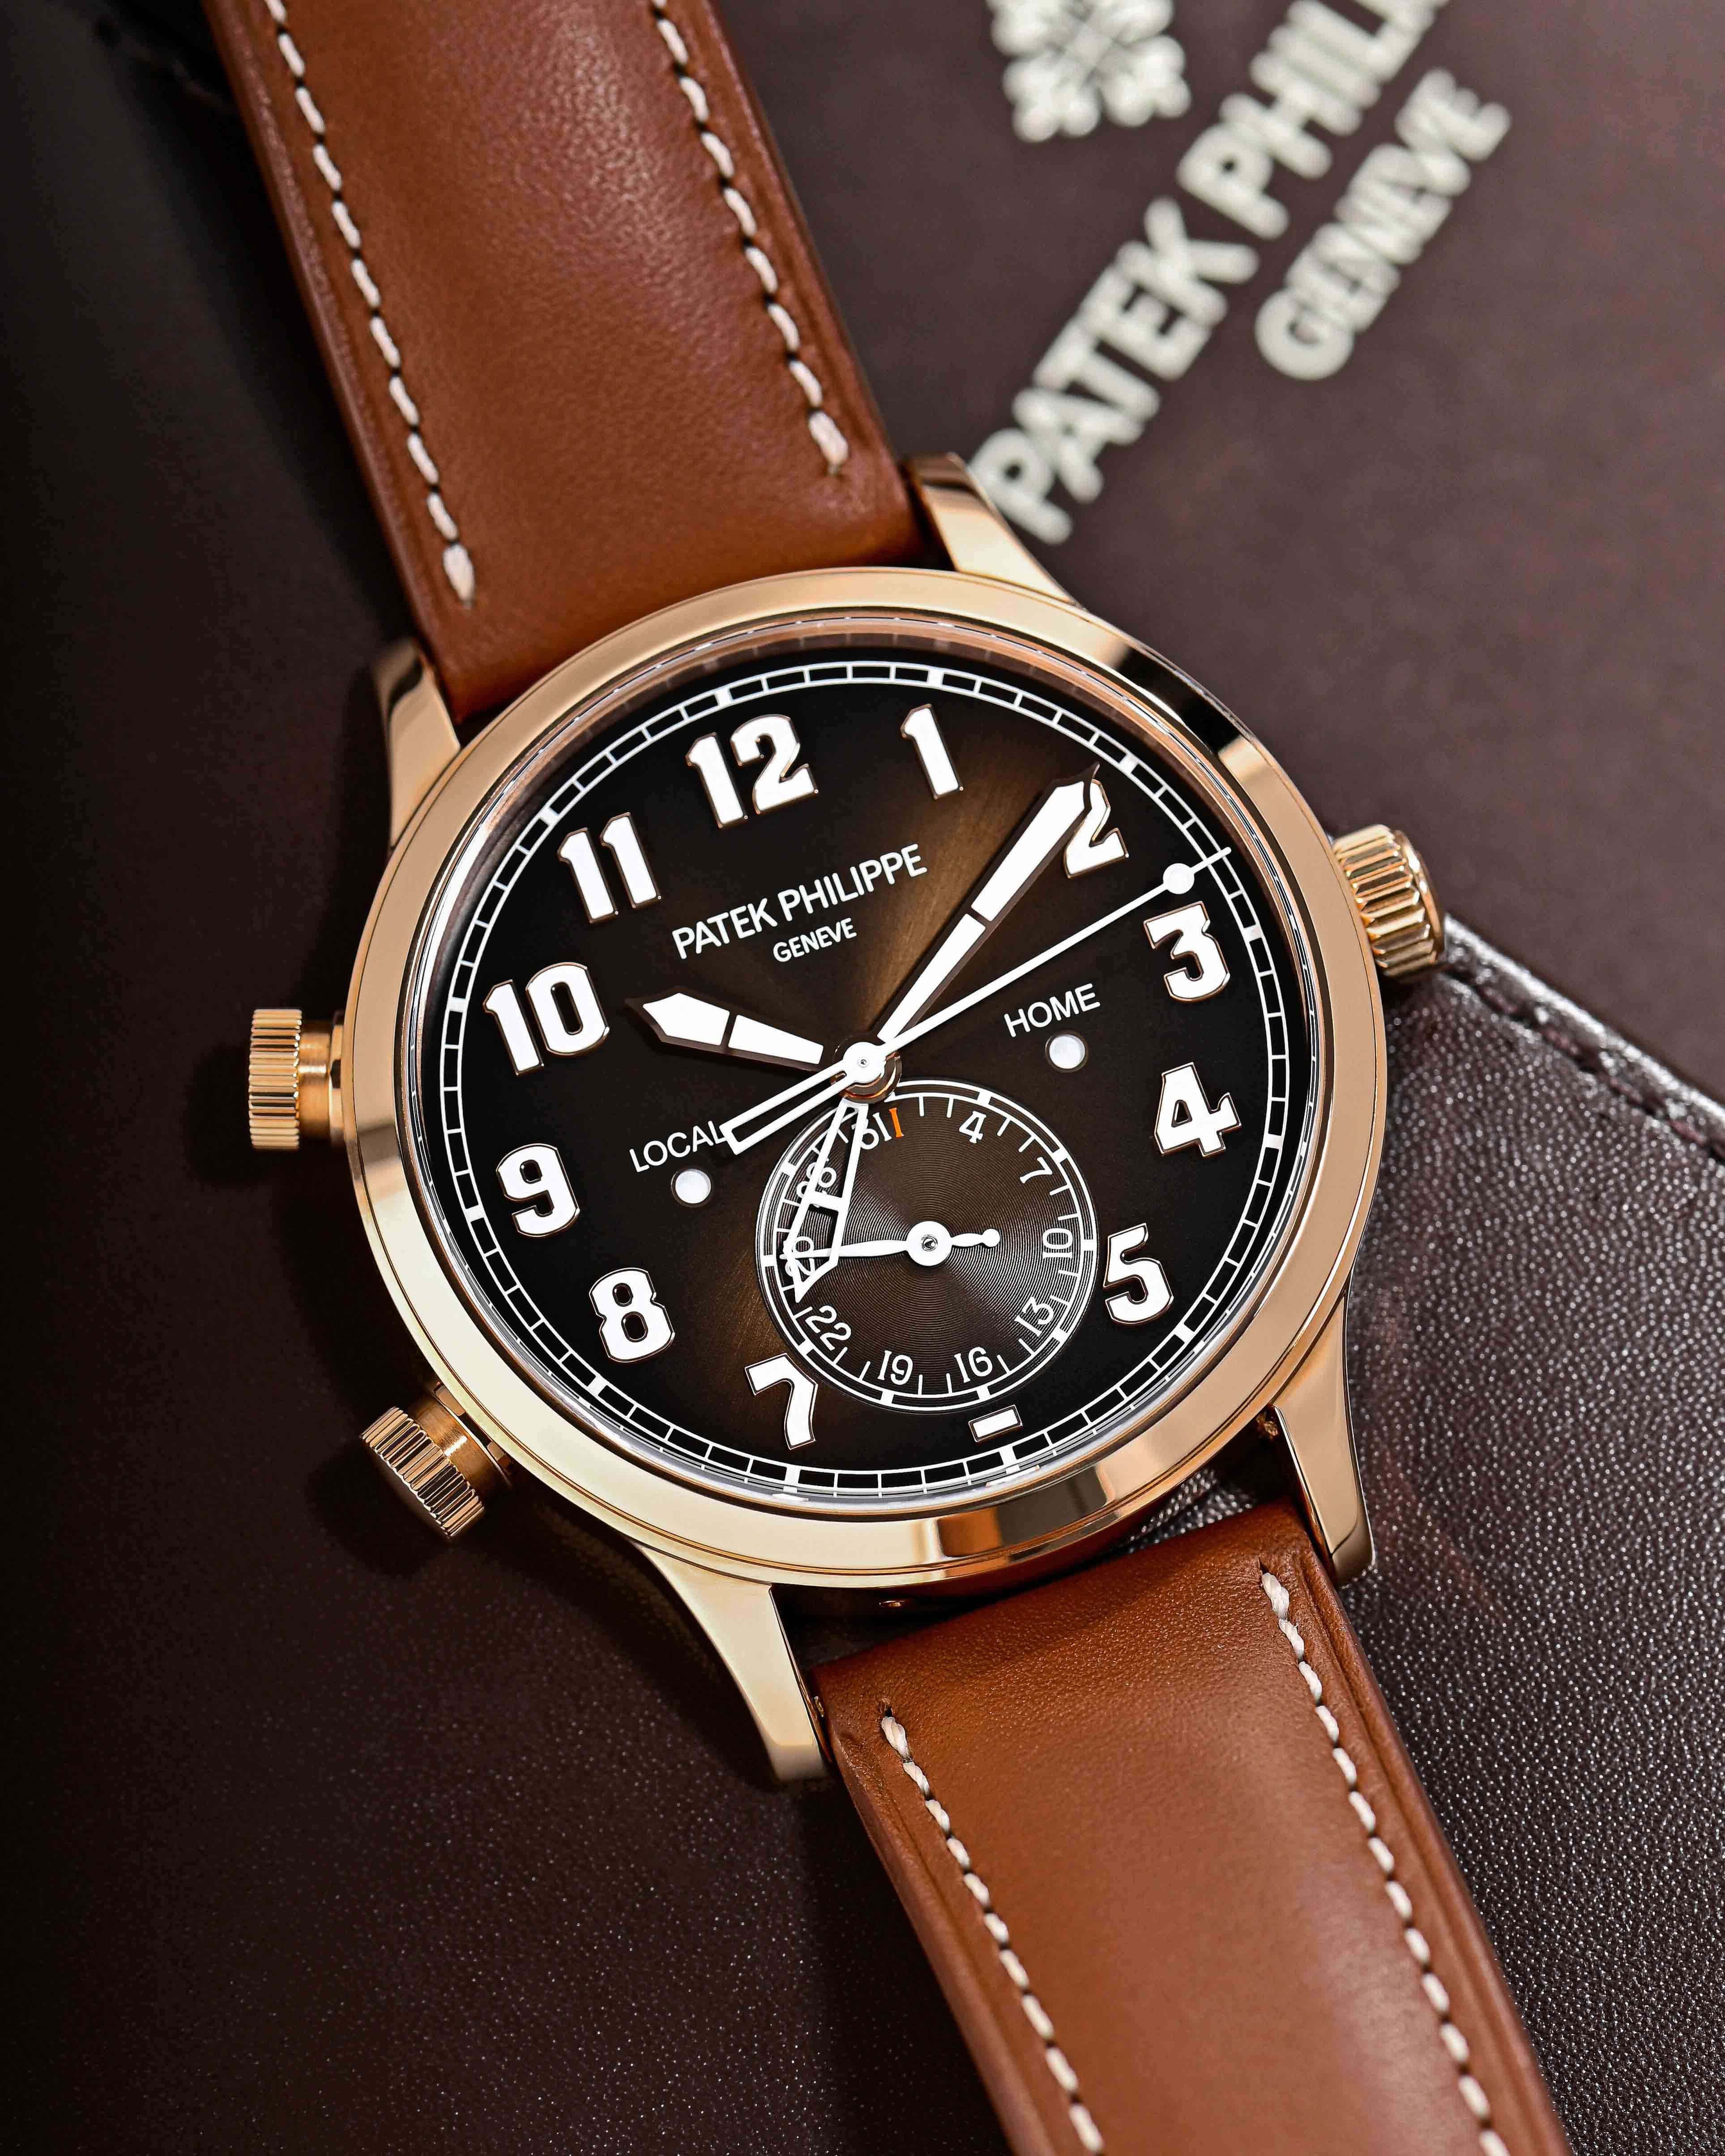 Patek Philippe Complications, Pilot Travel Time, 18K Rose Gold Case, Brown Dial, and Light Brown Leather Strap on a Brown Leather Background